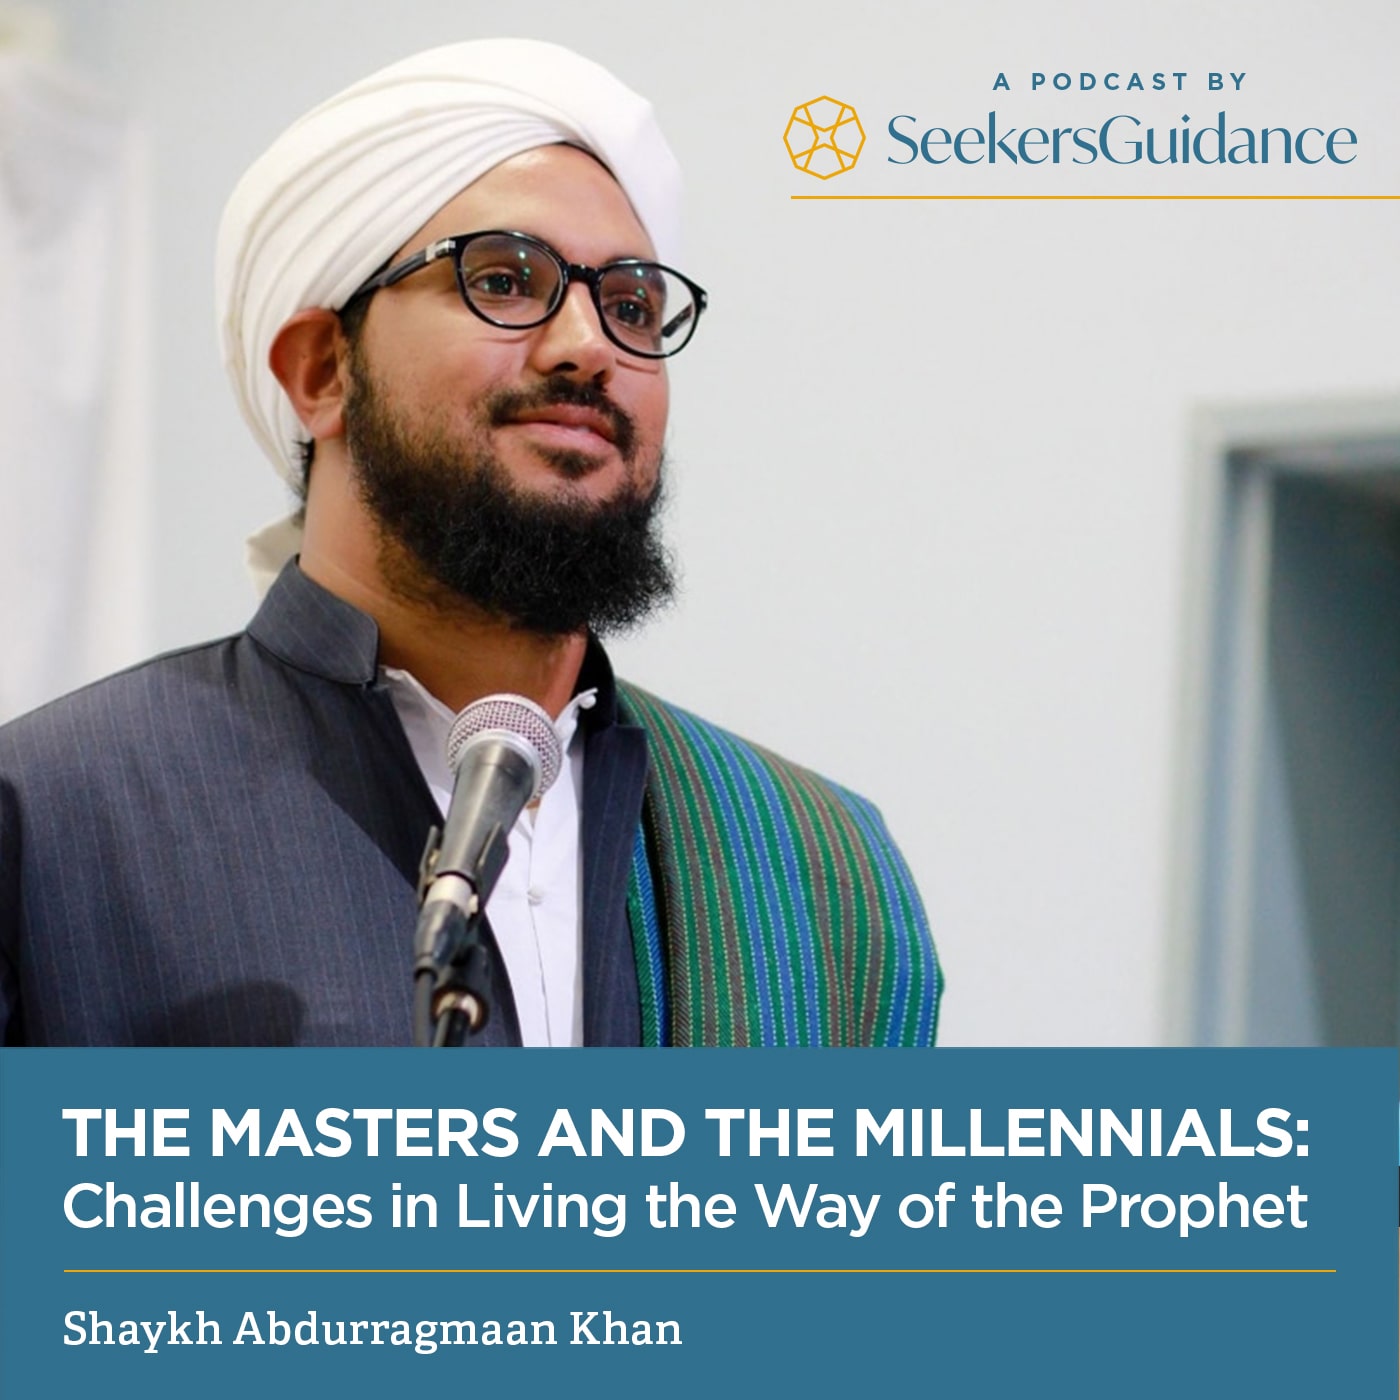 The Masters and the Millennials: Challenges in Living the Way of the Prophet